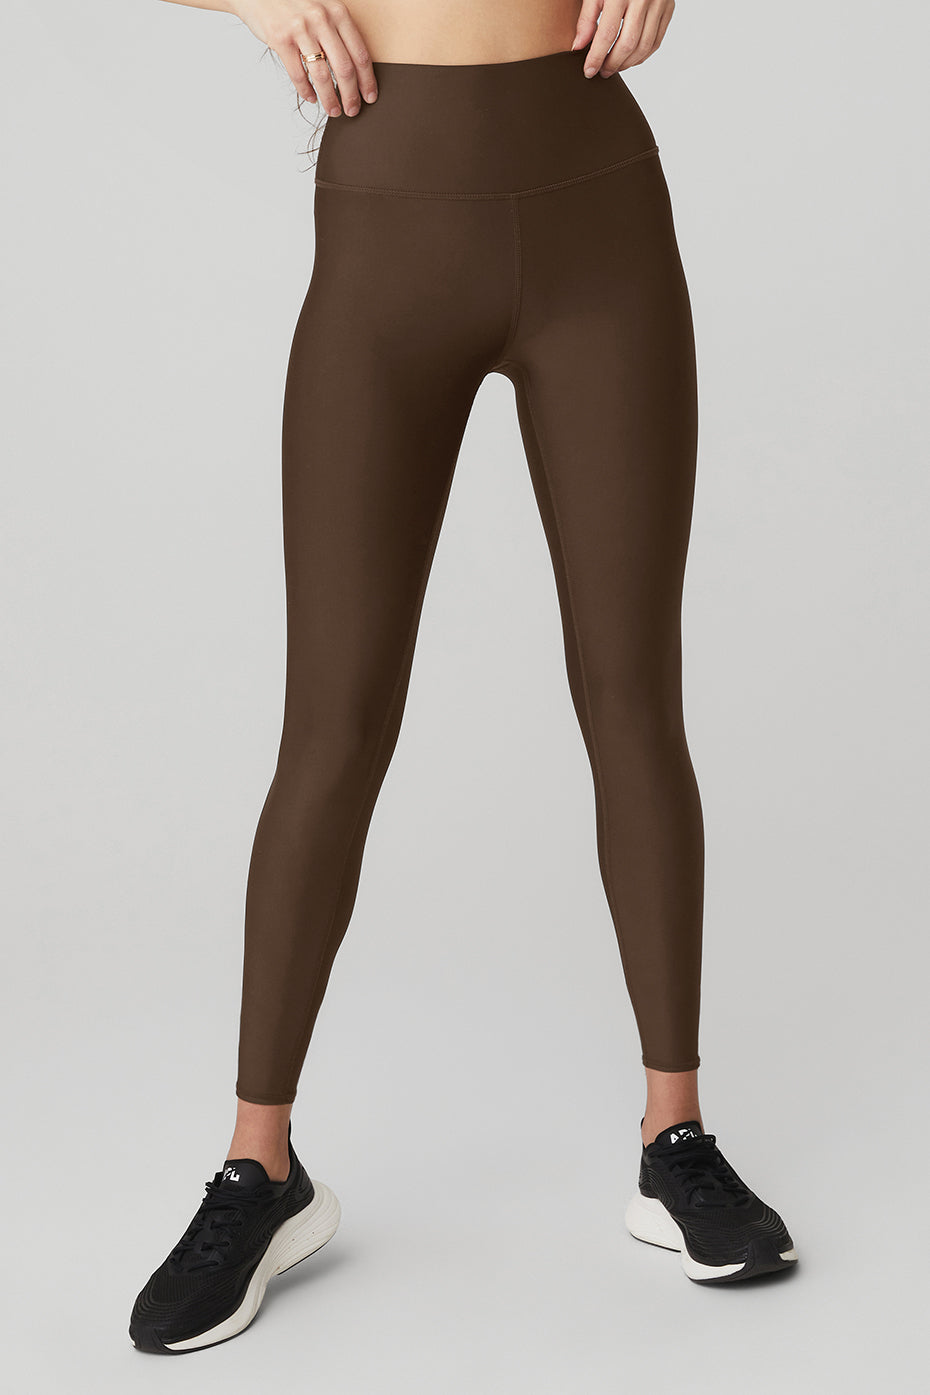 7/8 High-Waist Airlift Legging in Espresso by Alo Yoga | Ballet 